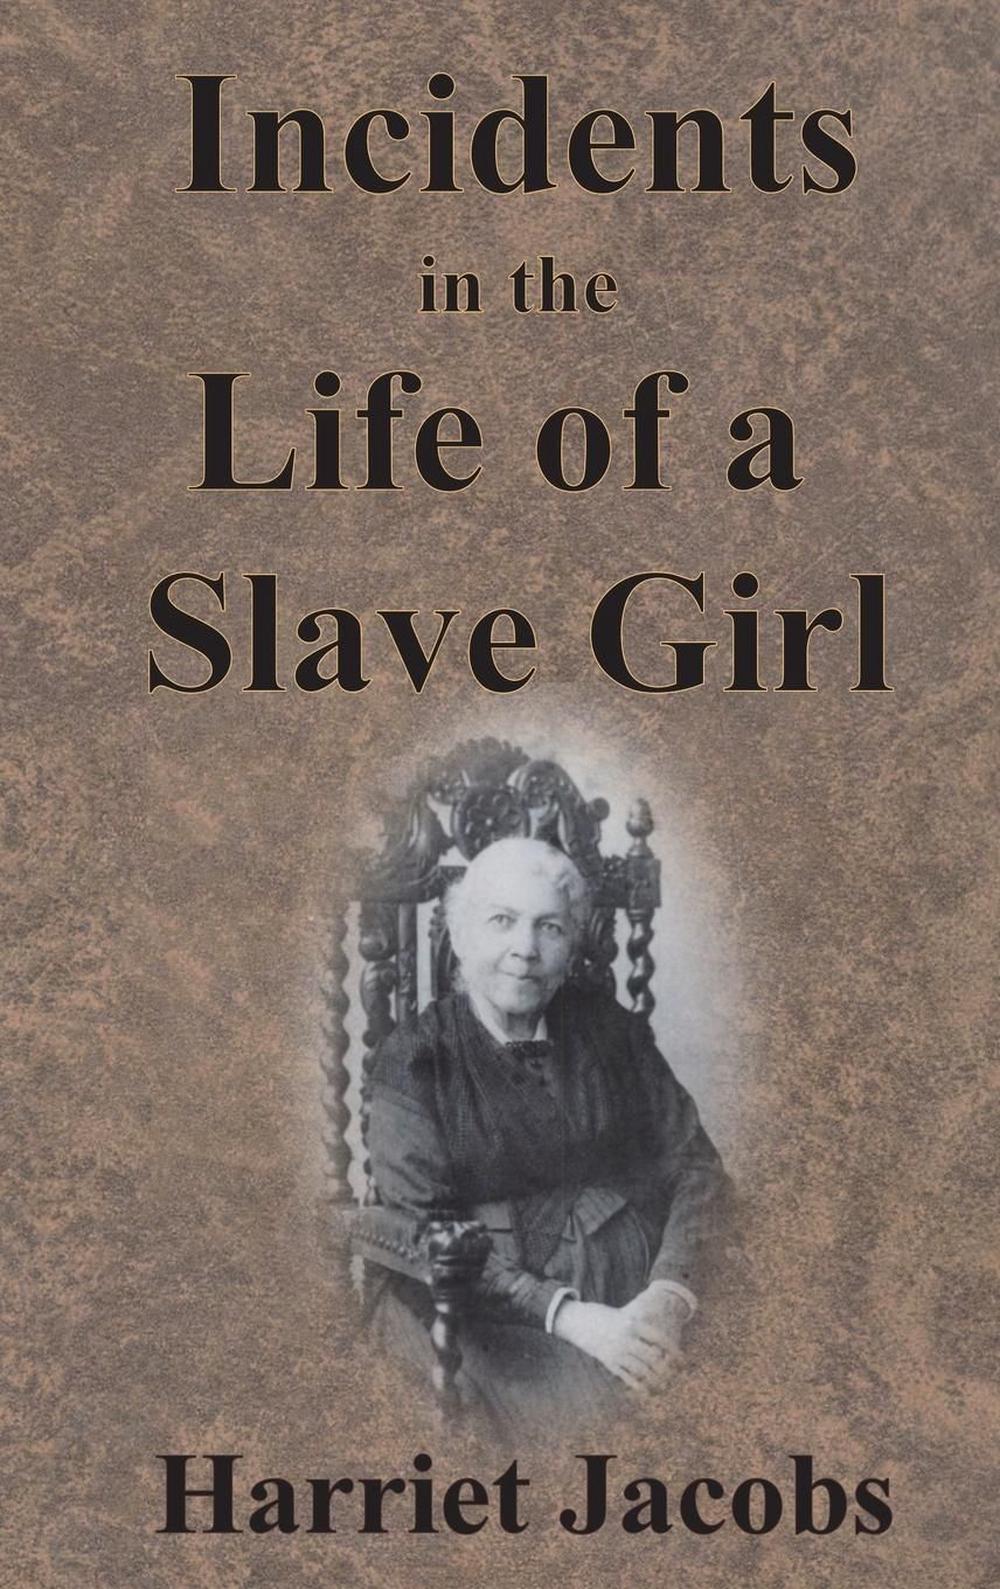 harriet jacobs life of a slave girl essay